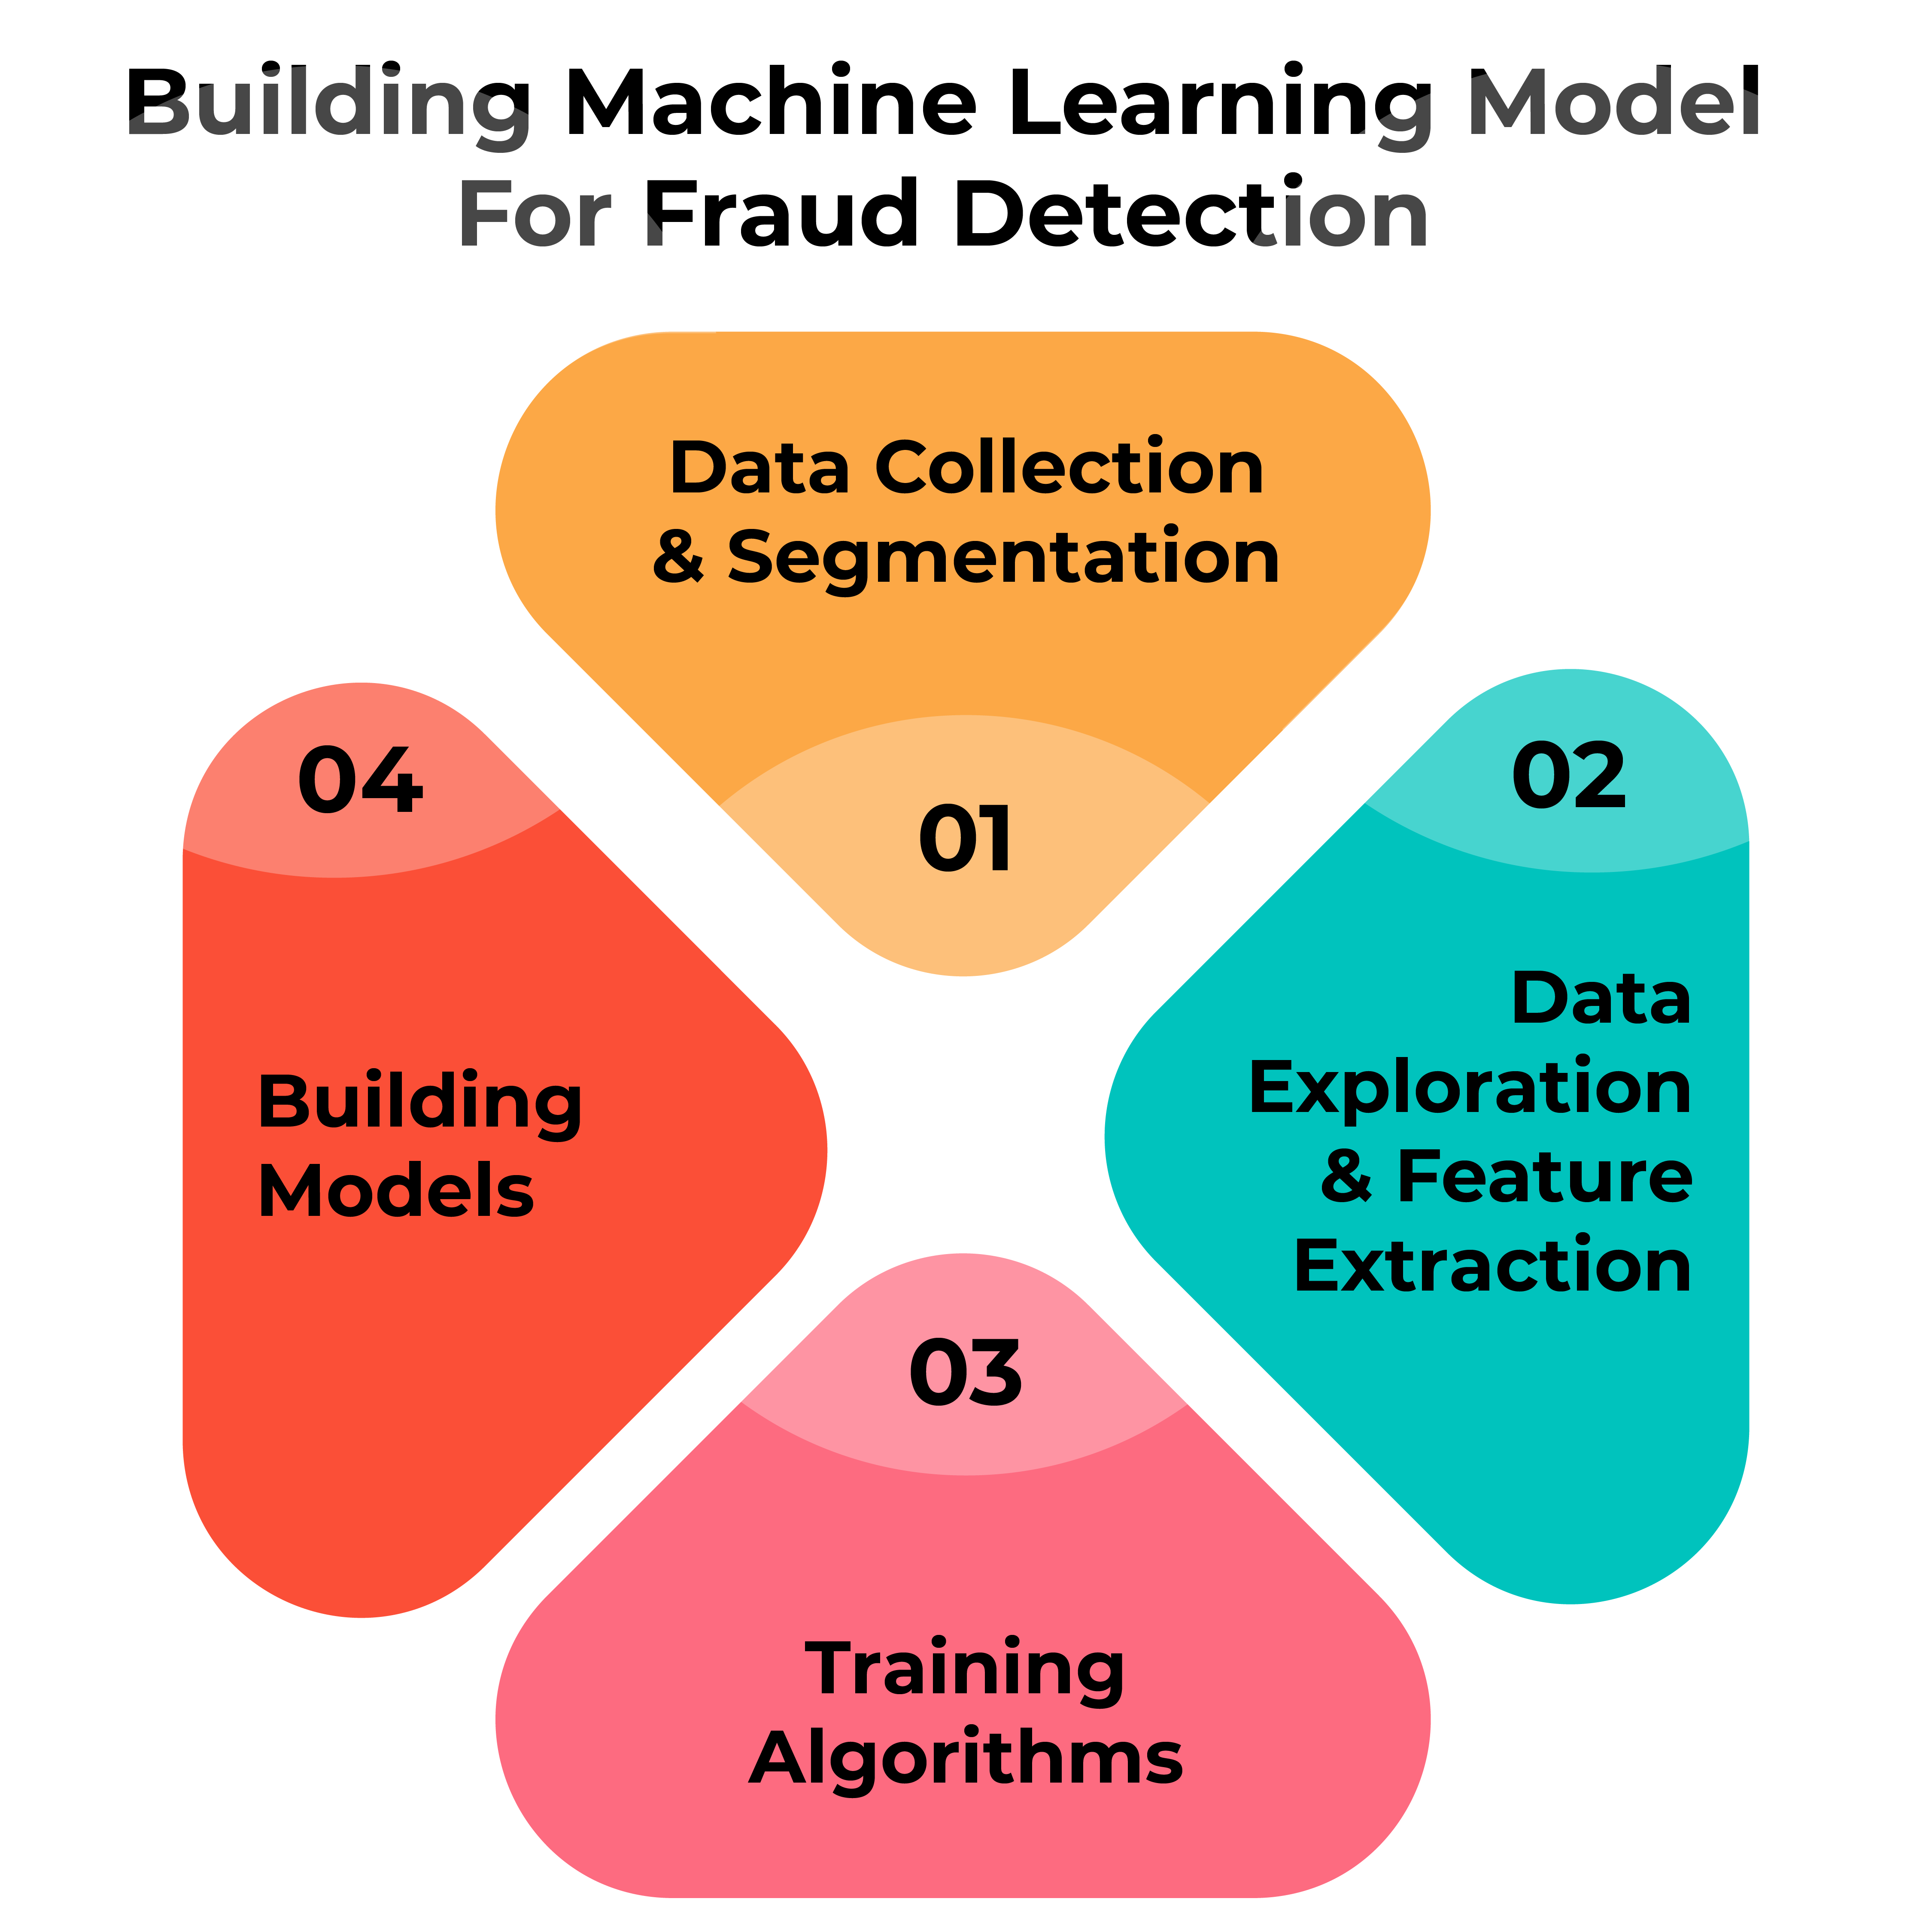 Building-Machinae-Learning-Model-For-Fraud-Detection